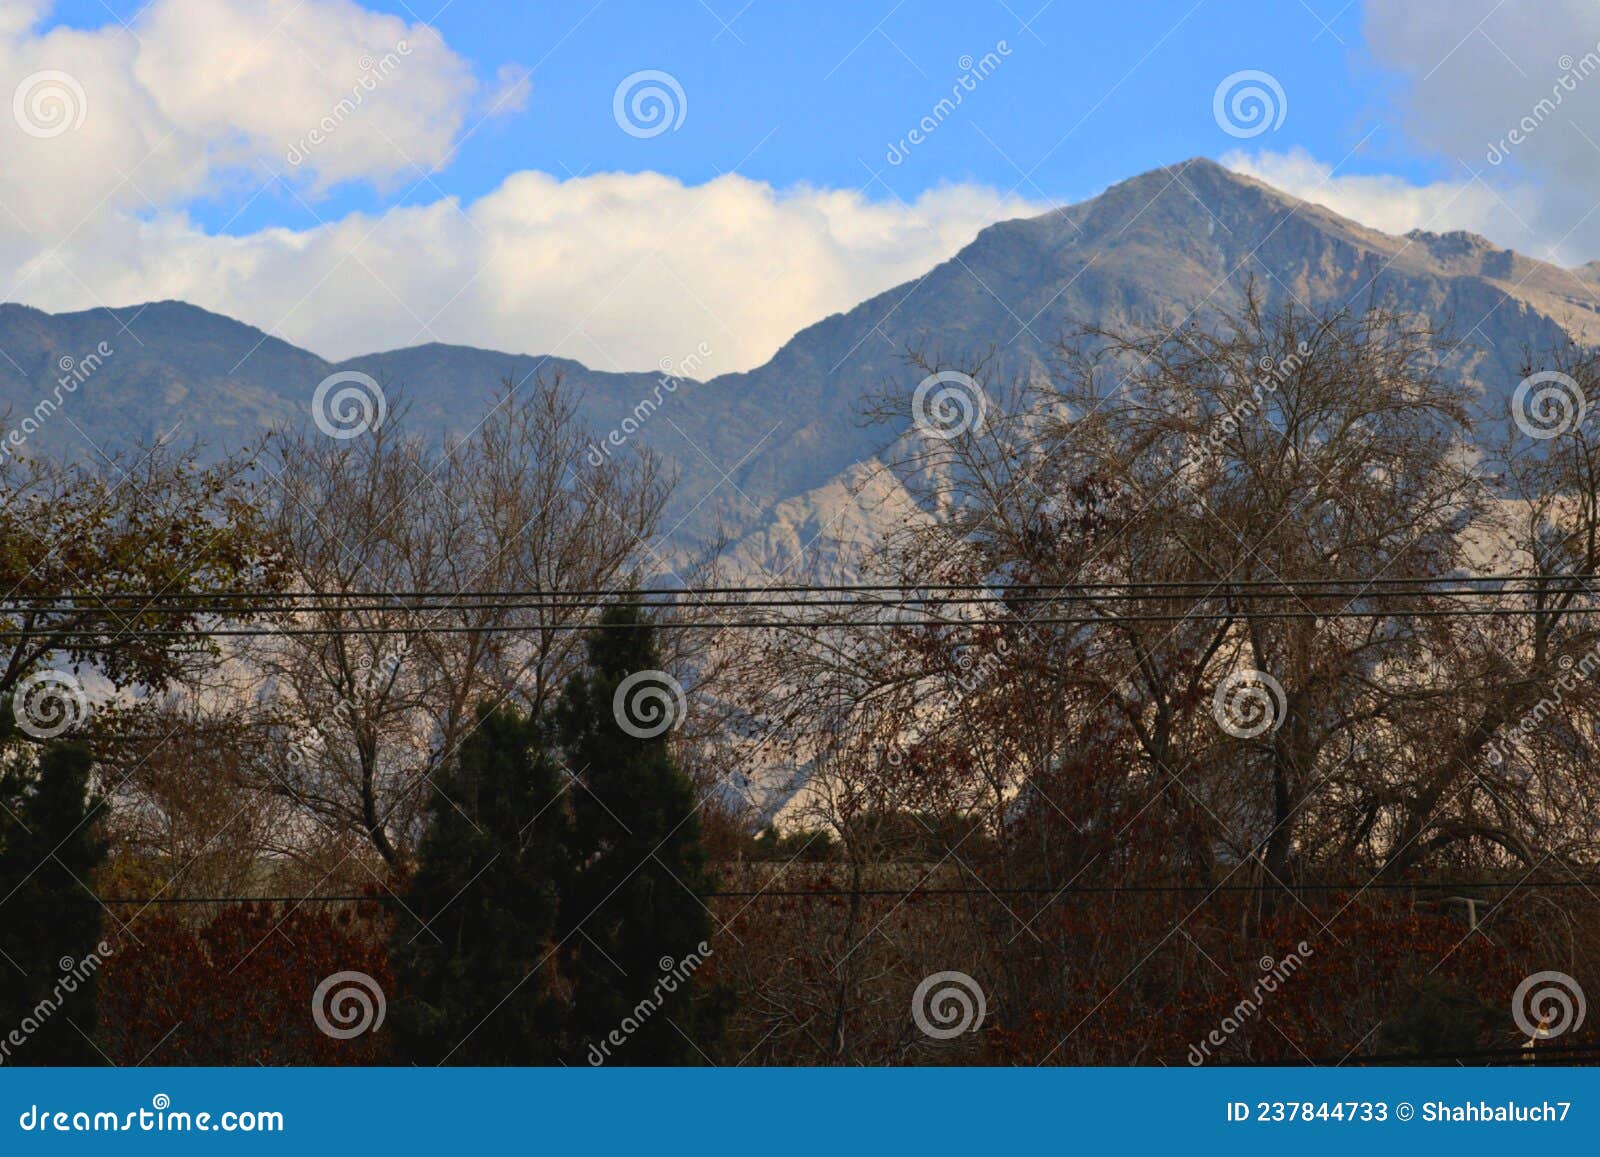 quetta city of mountains